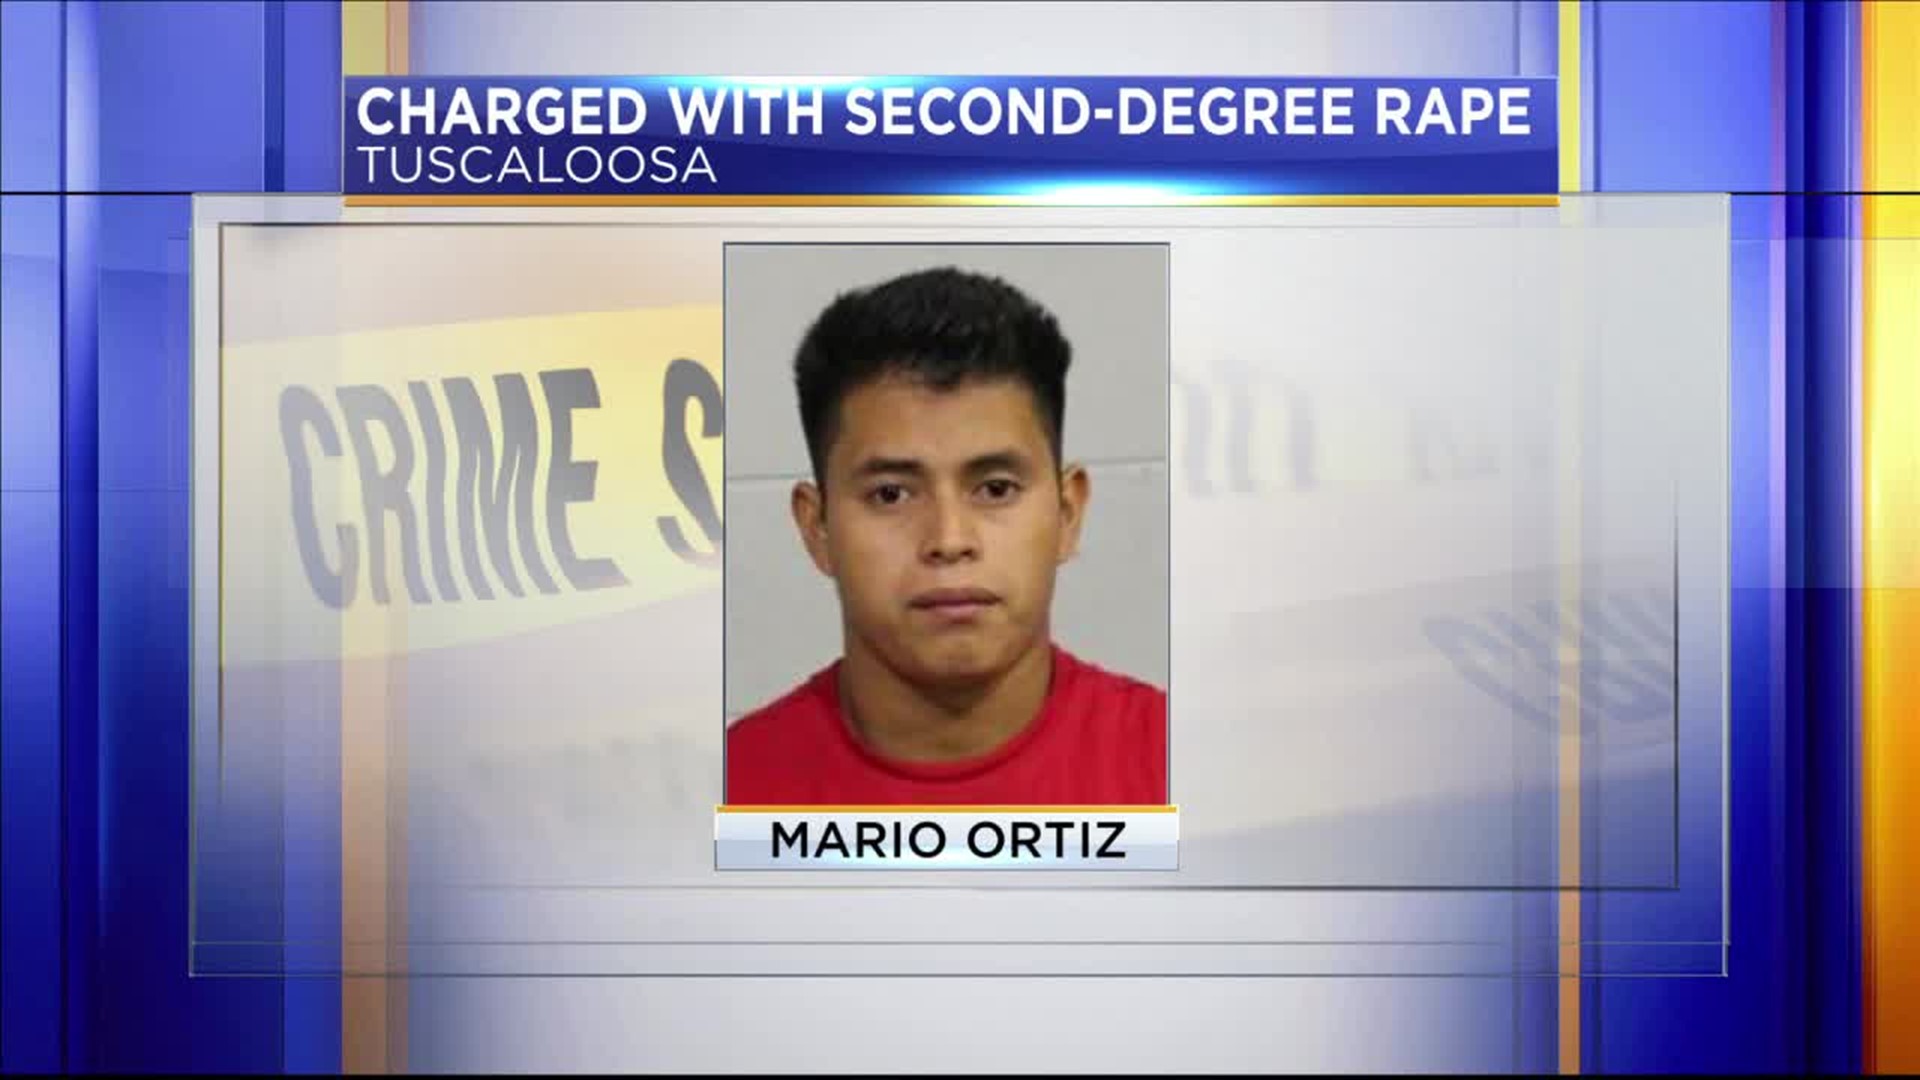 A man was arrested today for the sexual assault of a 12-year-old girl.